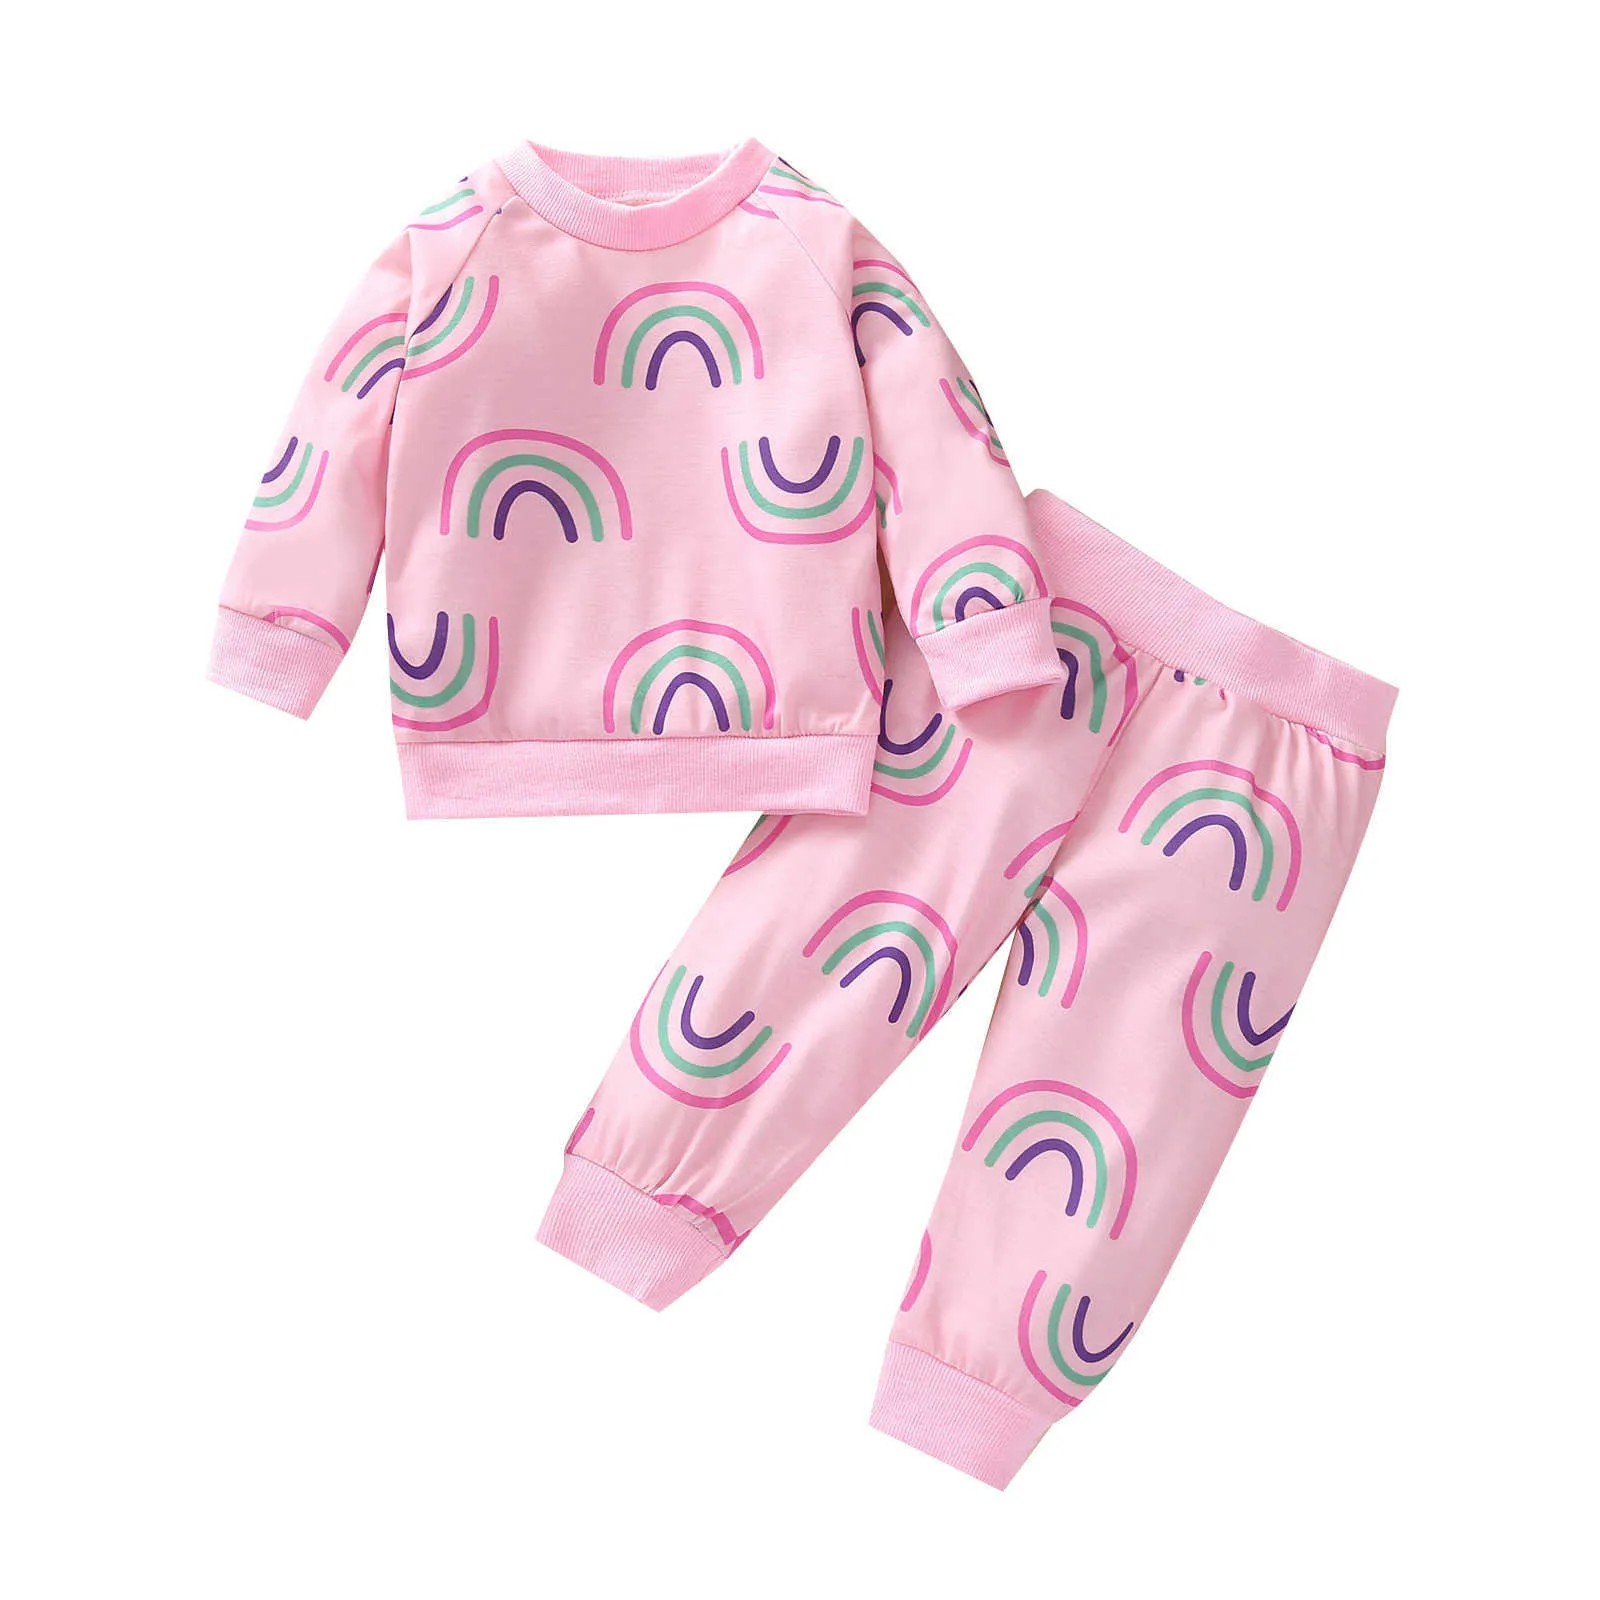 Toddler Girls Chill Sets for Kids Ins Fashion Rainbow Print Jogger Set Spring Boutique Clothing 210529